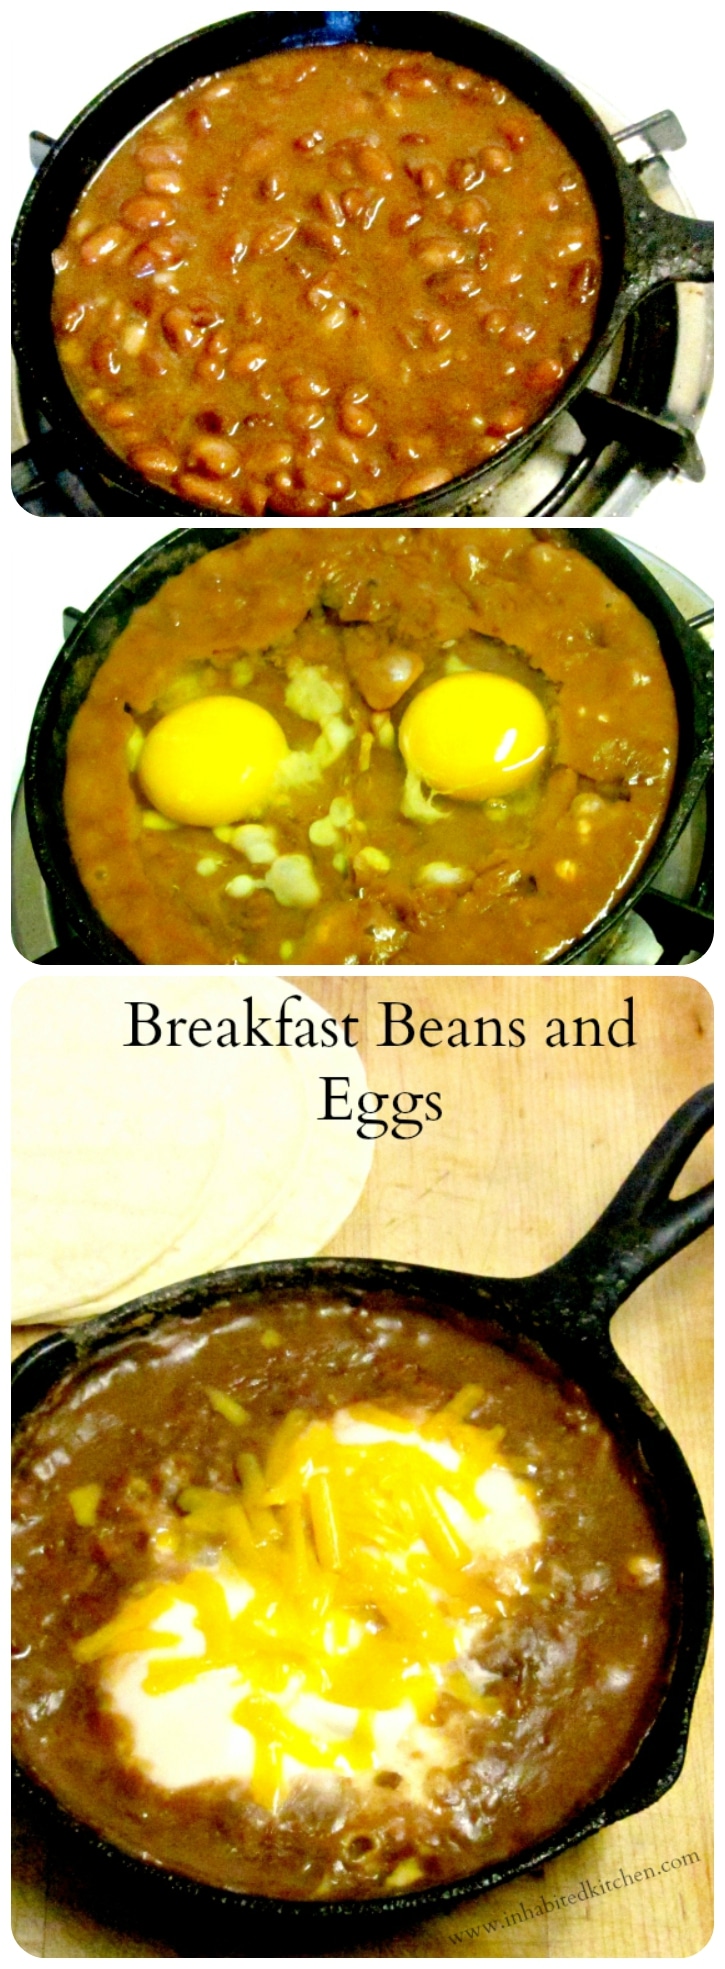 A quick, easy, and nutritious breakfast of beans and eggs, with perhaps a sprinkle of cheese, served over corn tortillas.